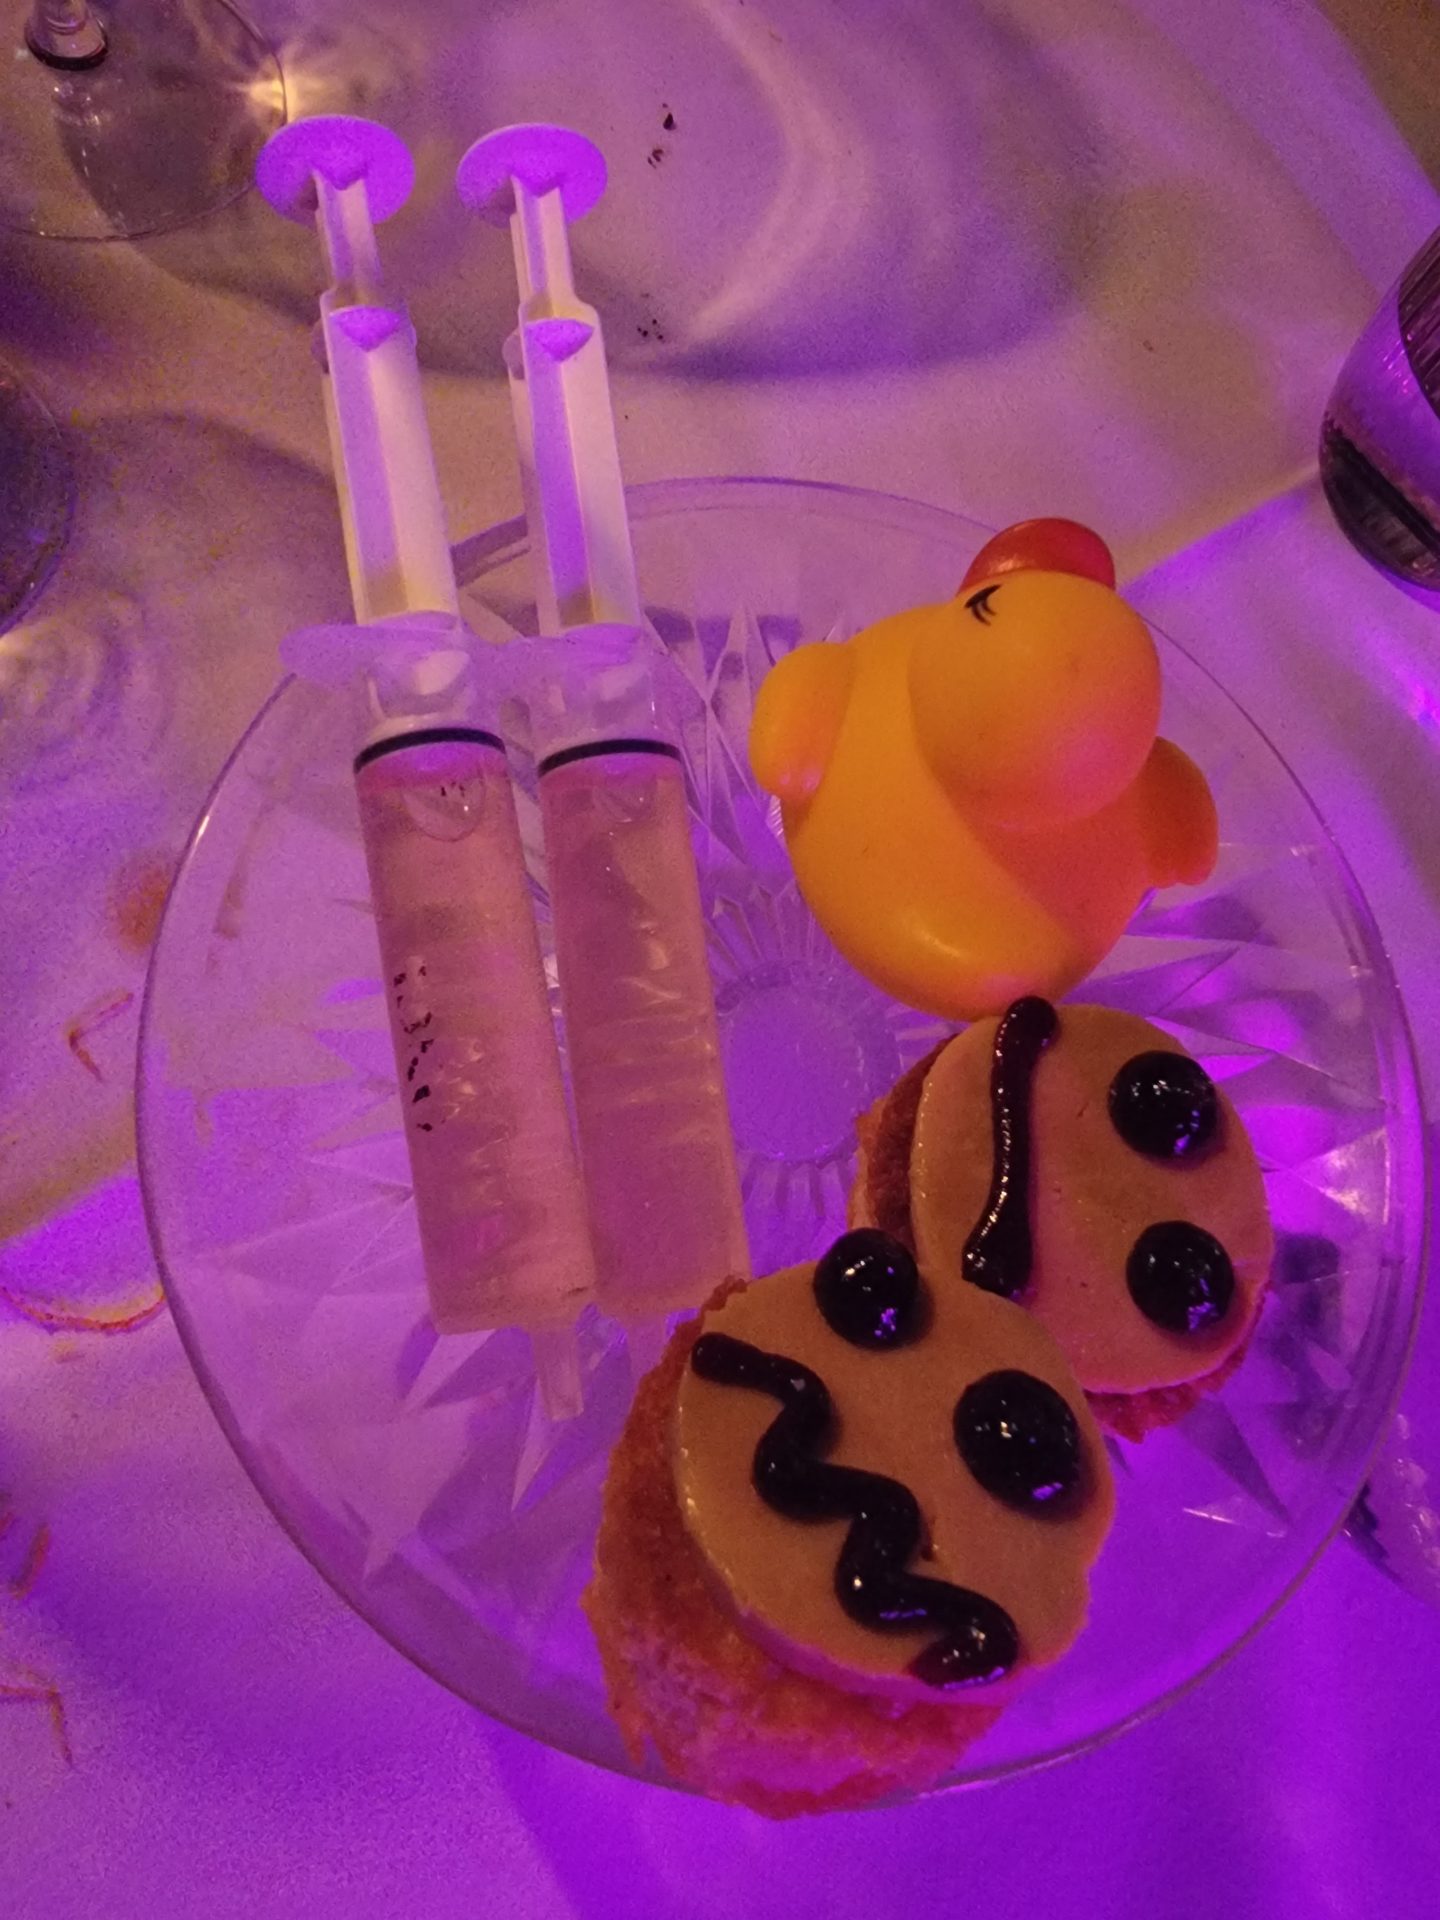 a plate with food and syringes on it